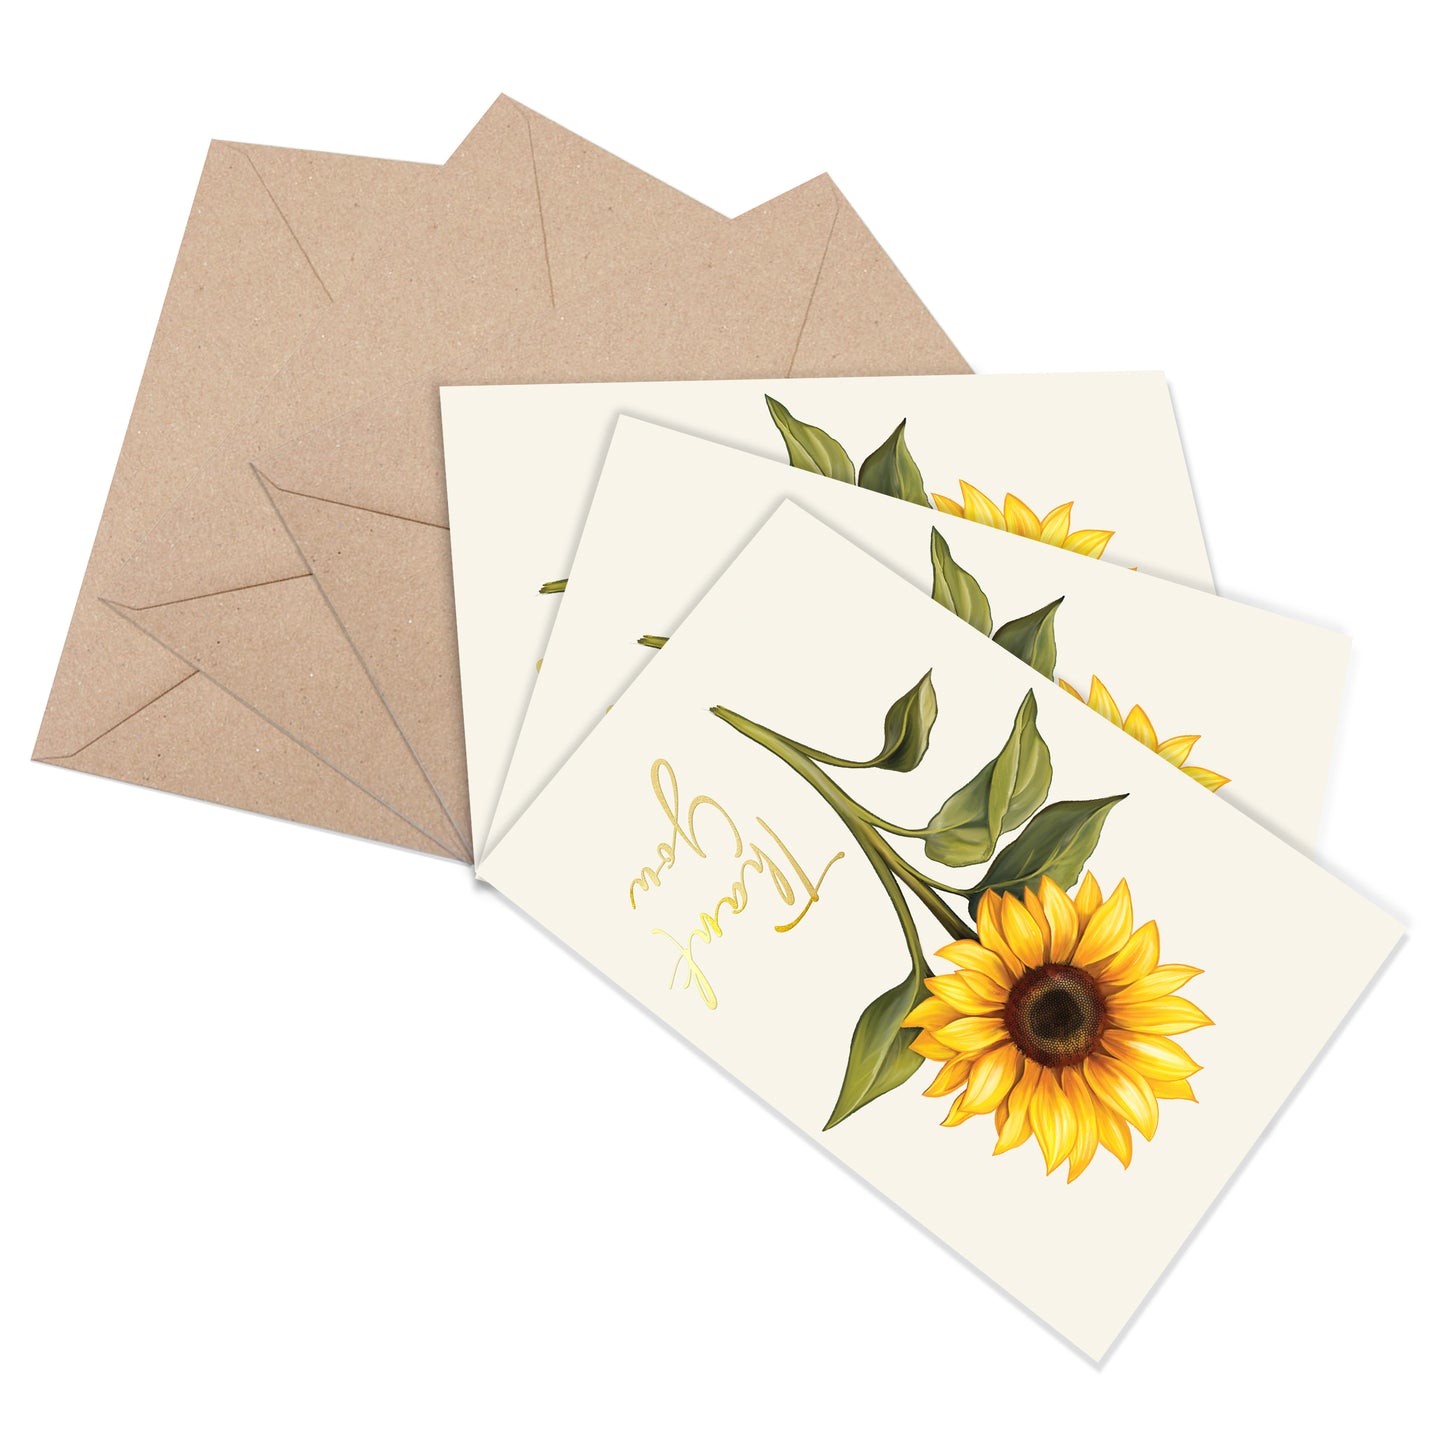 Foiled Thank You Cards Multipack - Sunflower Thank You Cards - Pack of 24 Cards